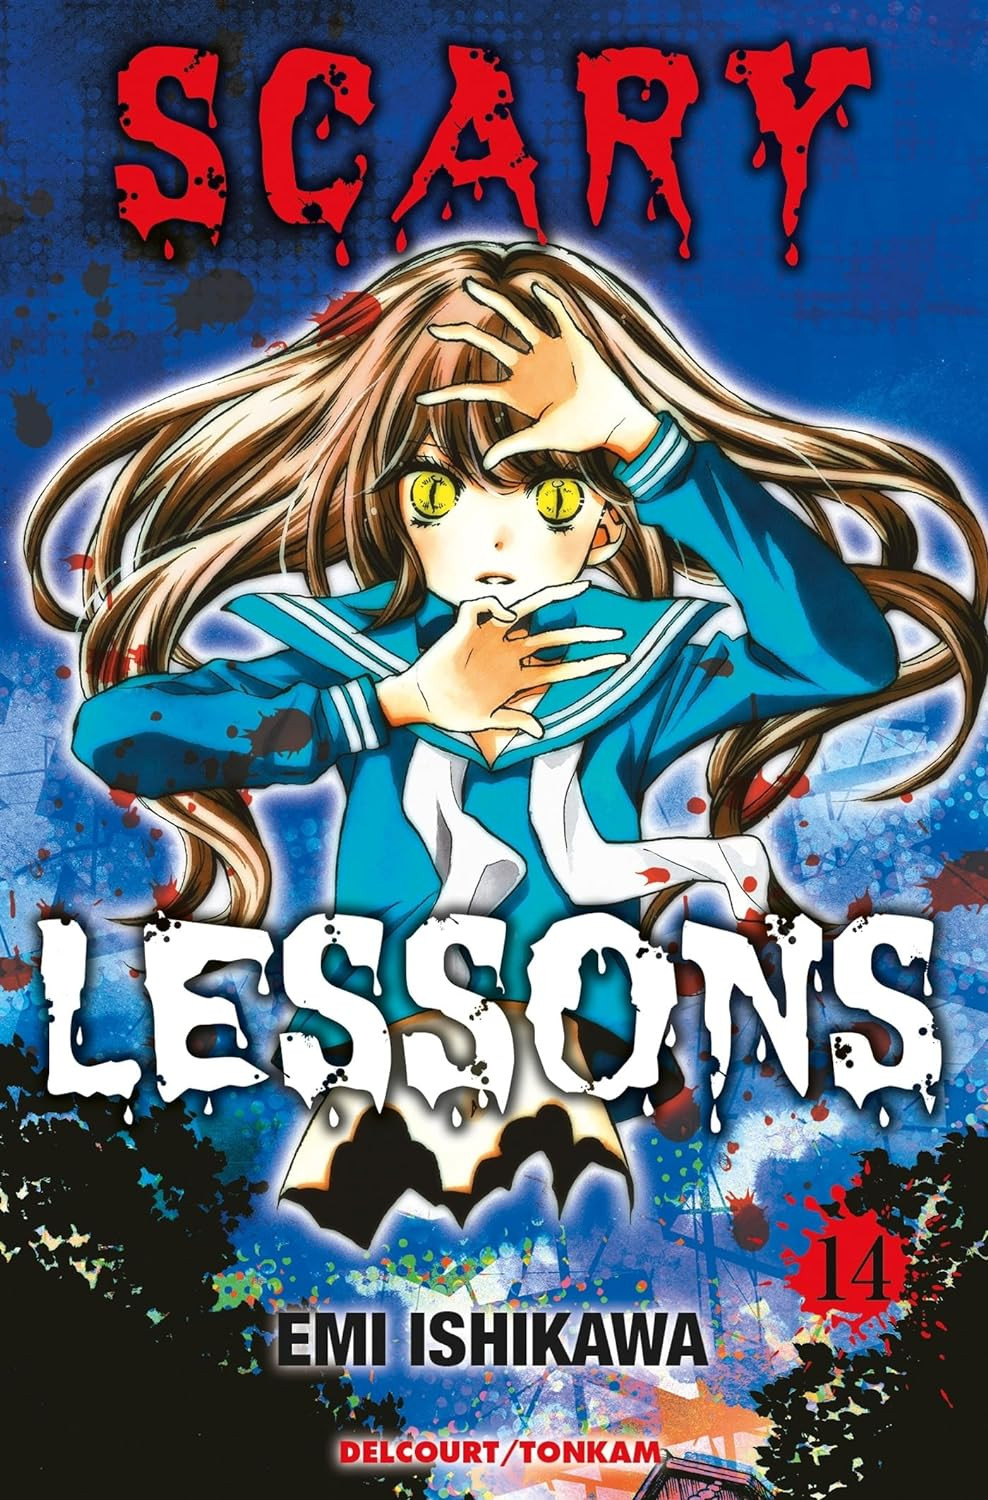 Scary Lessons Vol.14